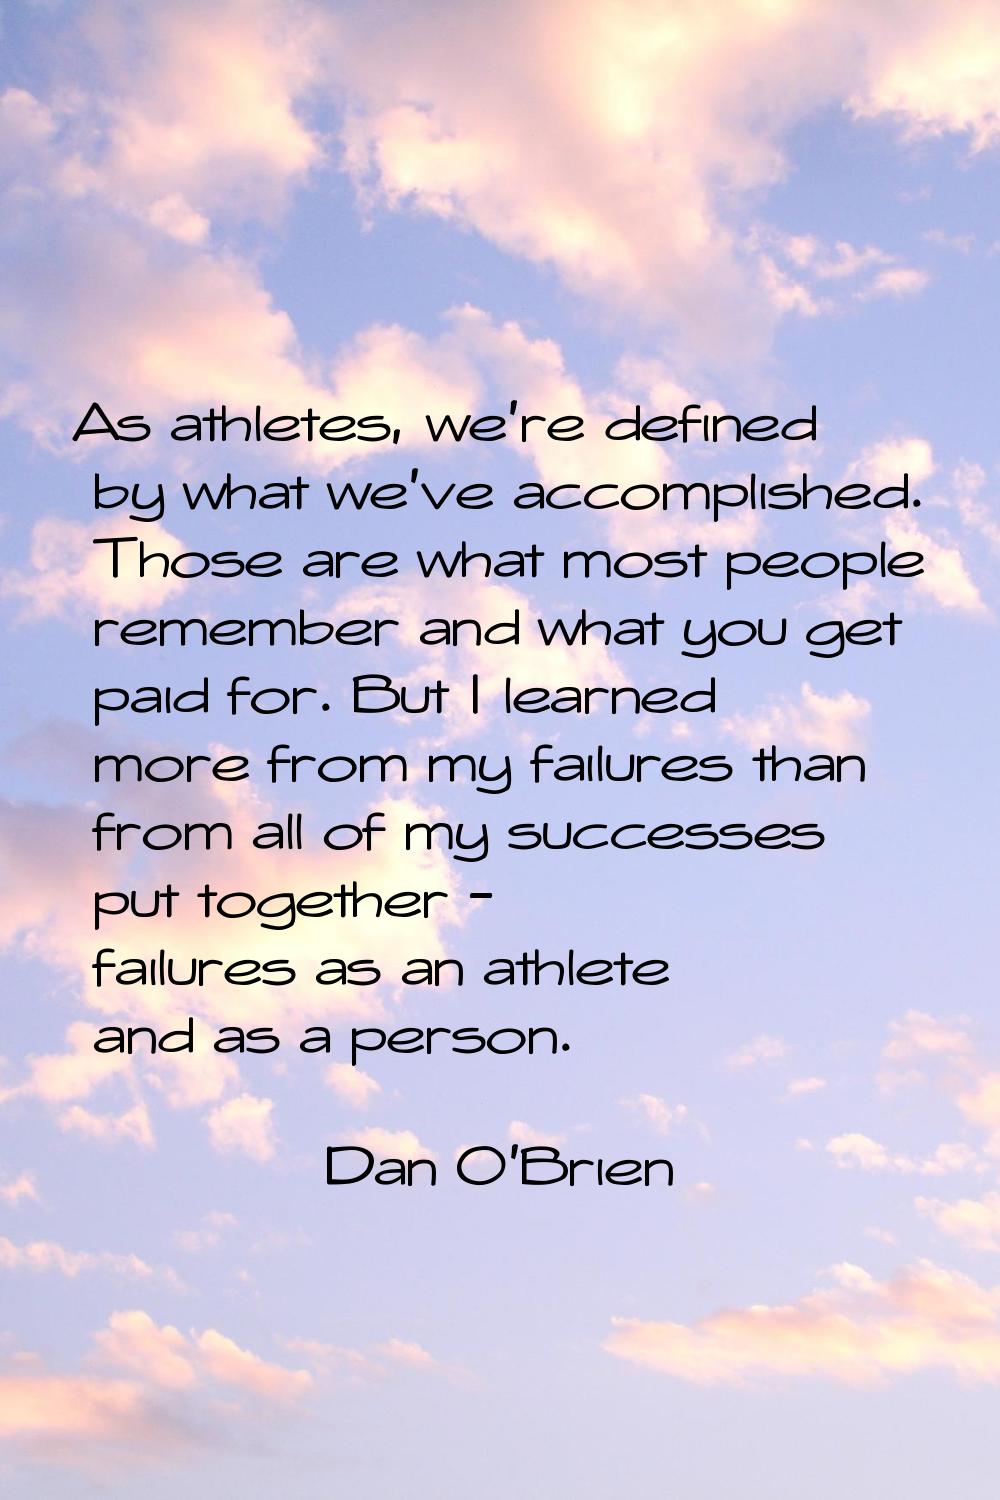 As athletes, we're defined by what we've accomplished. Those are what most people remember and what